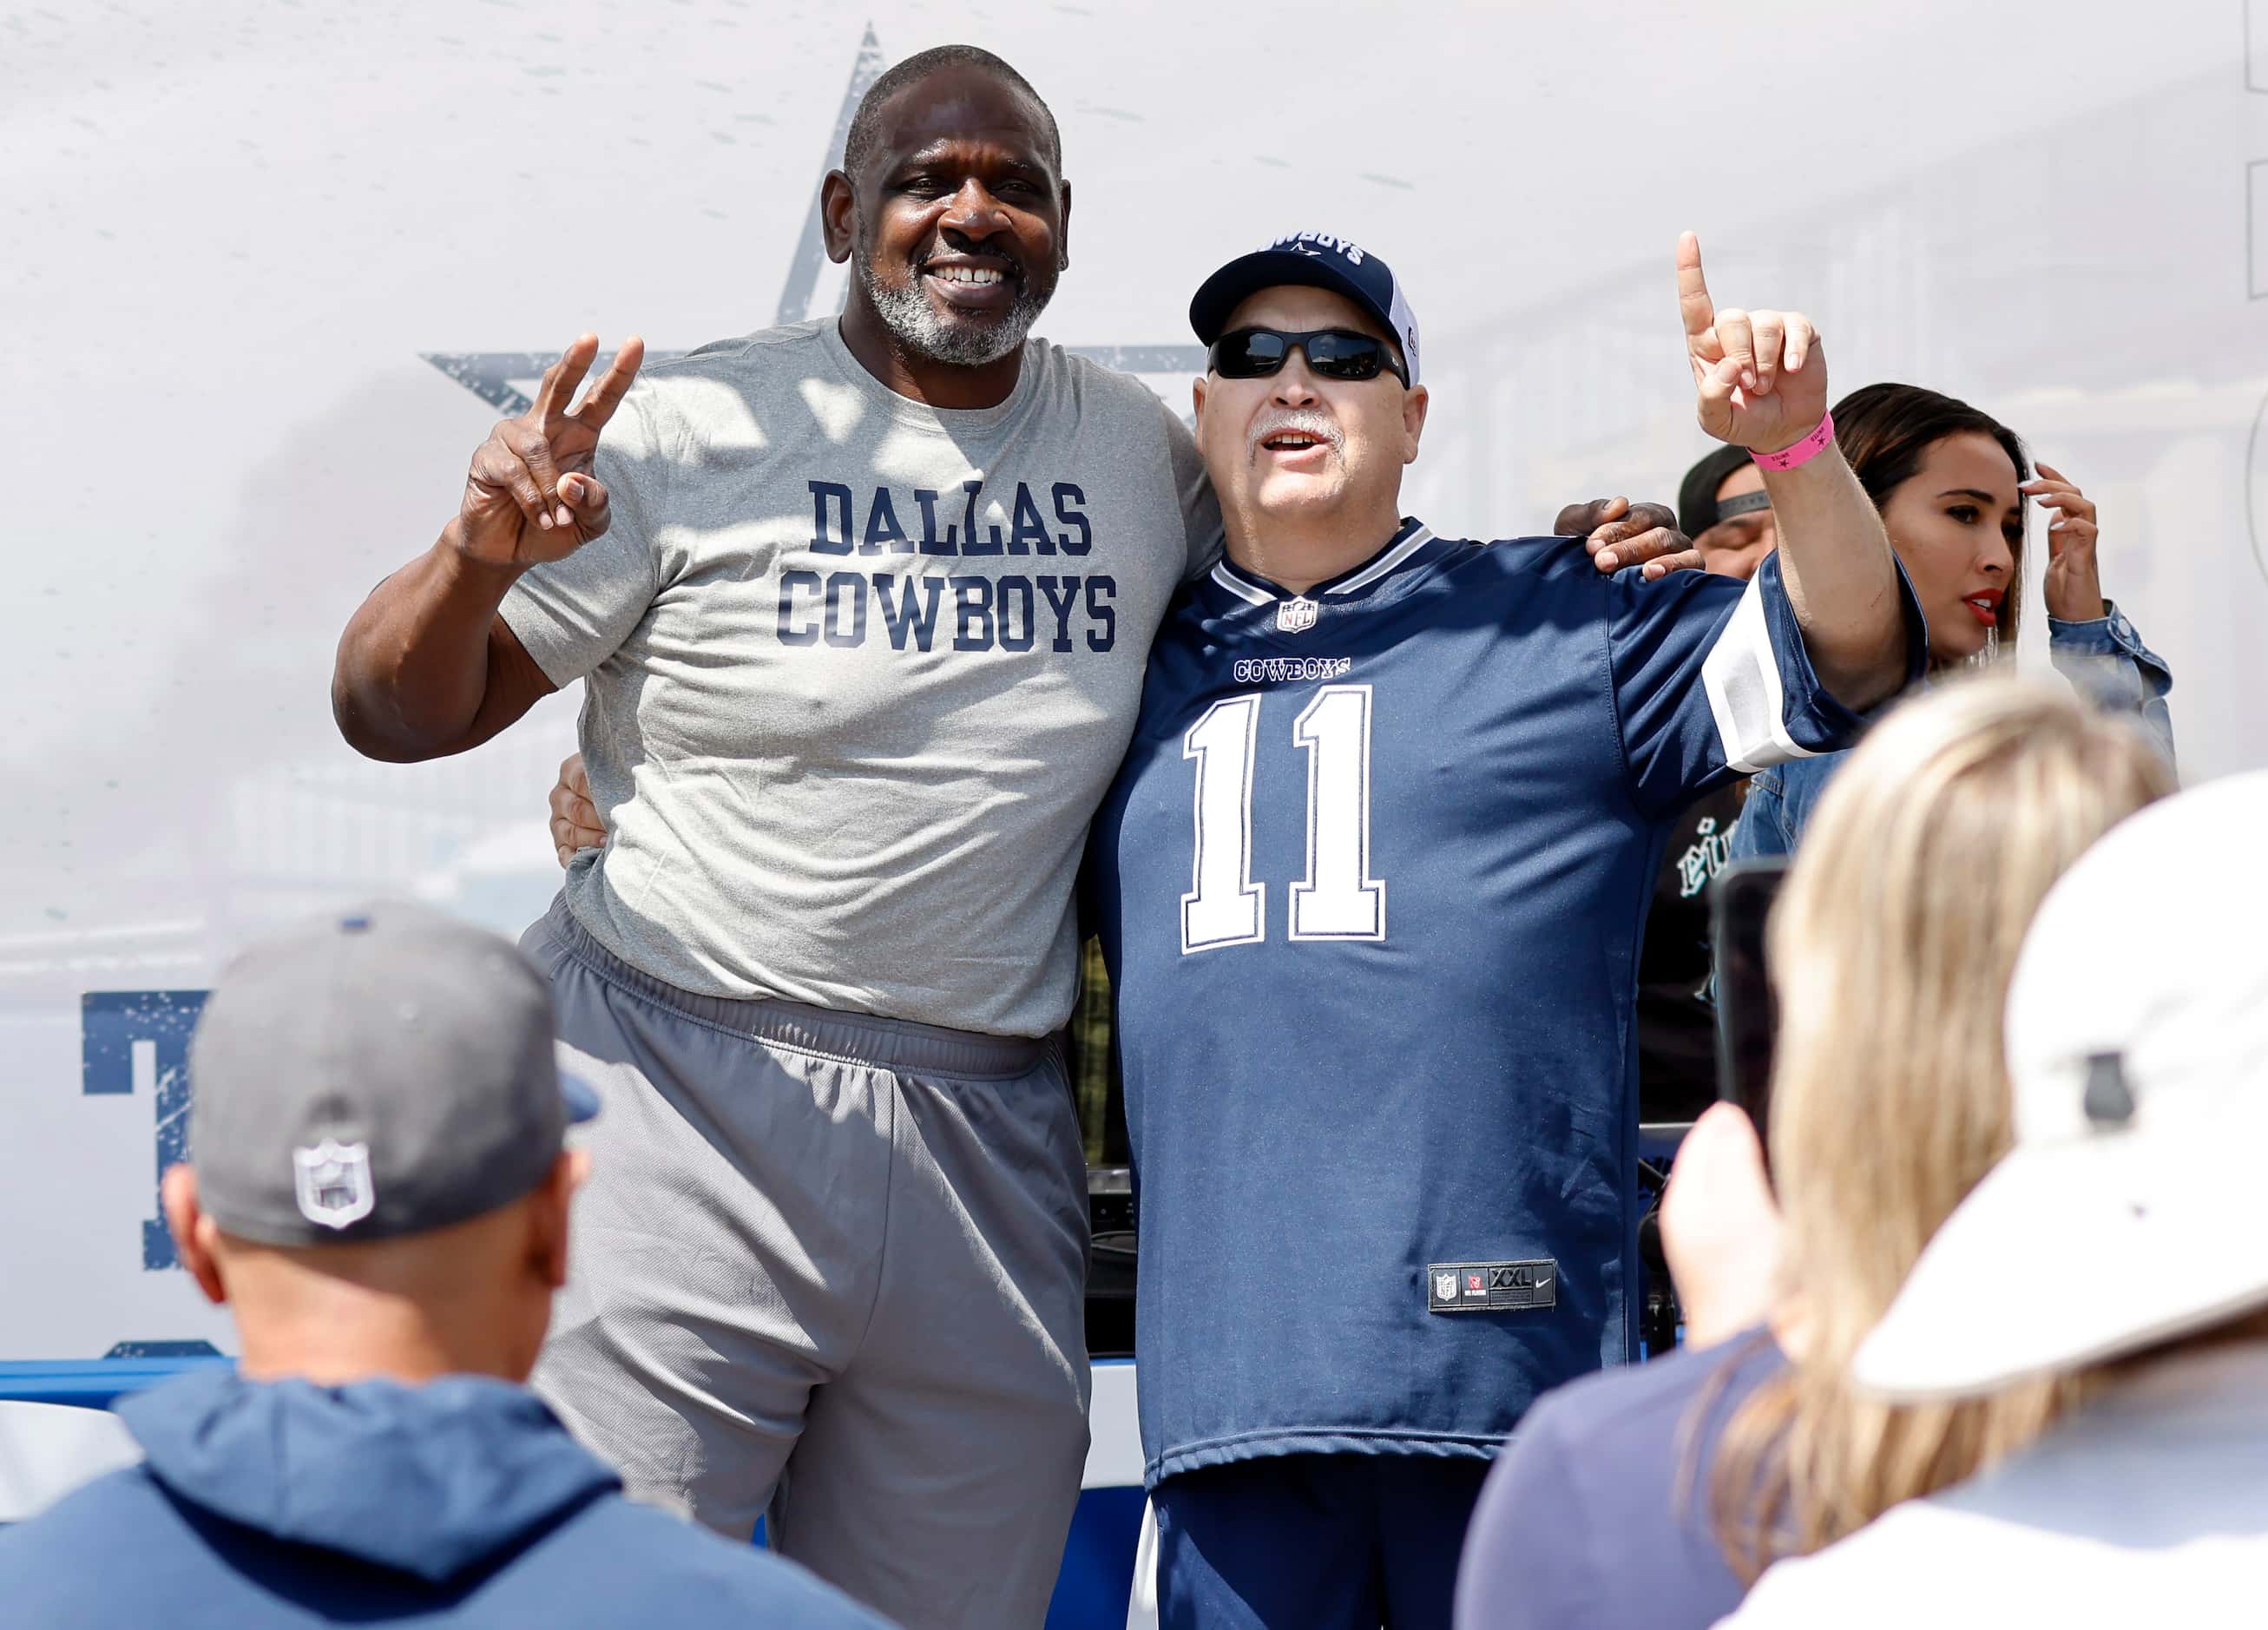 Dallas Cowboys fan Kevin Knott of Reedley, California (right) poses for a photo by his wife...